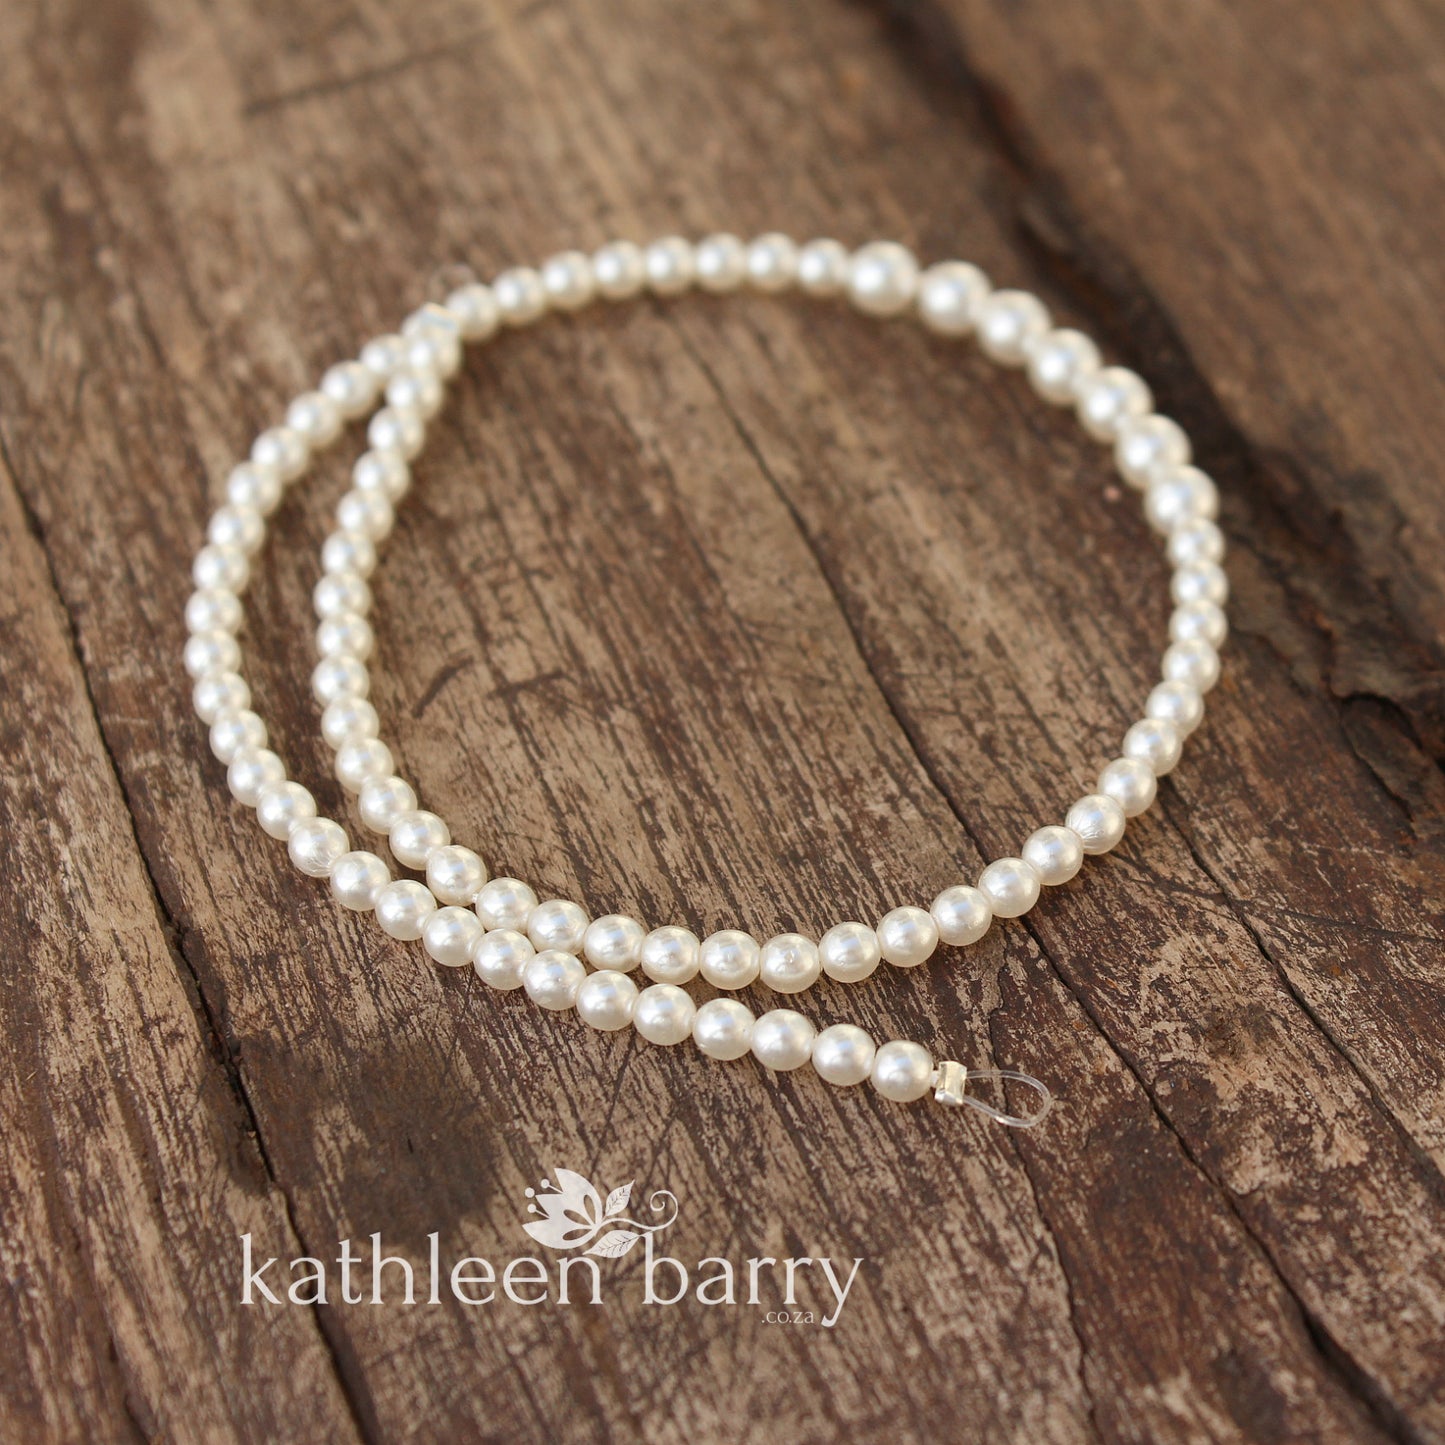 Dainty pearl chain for hair and linking hairpieces or sewing onto garments